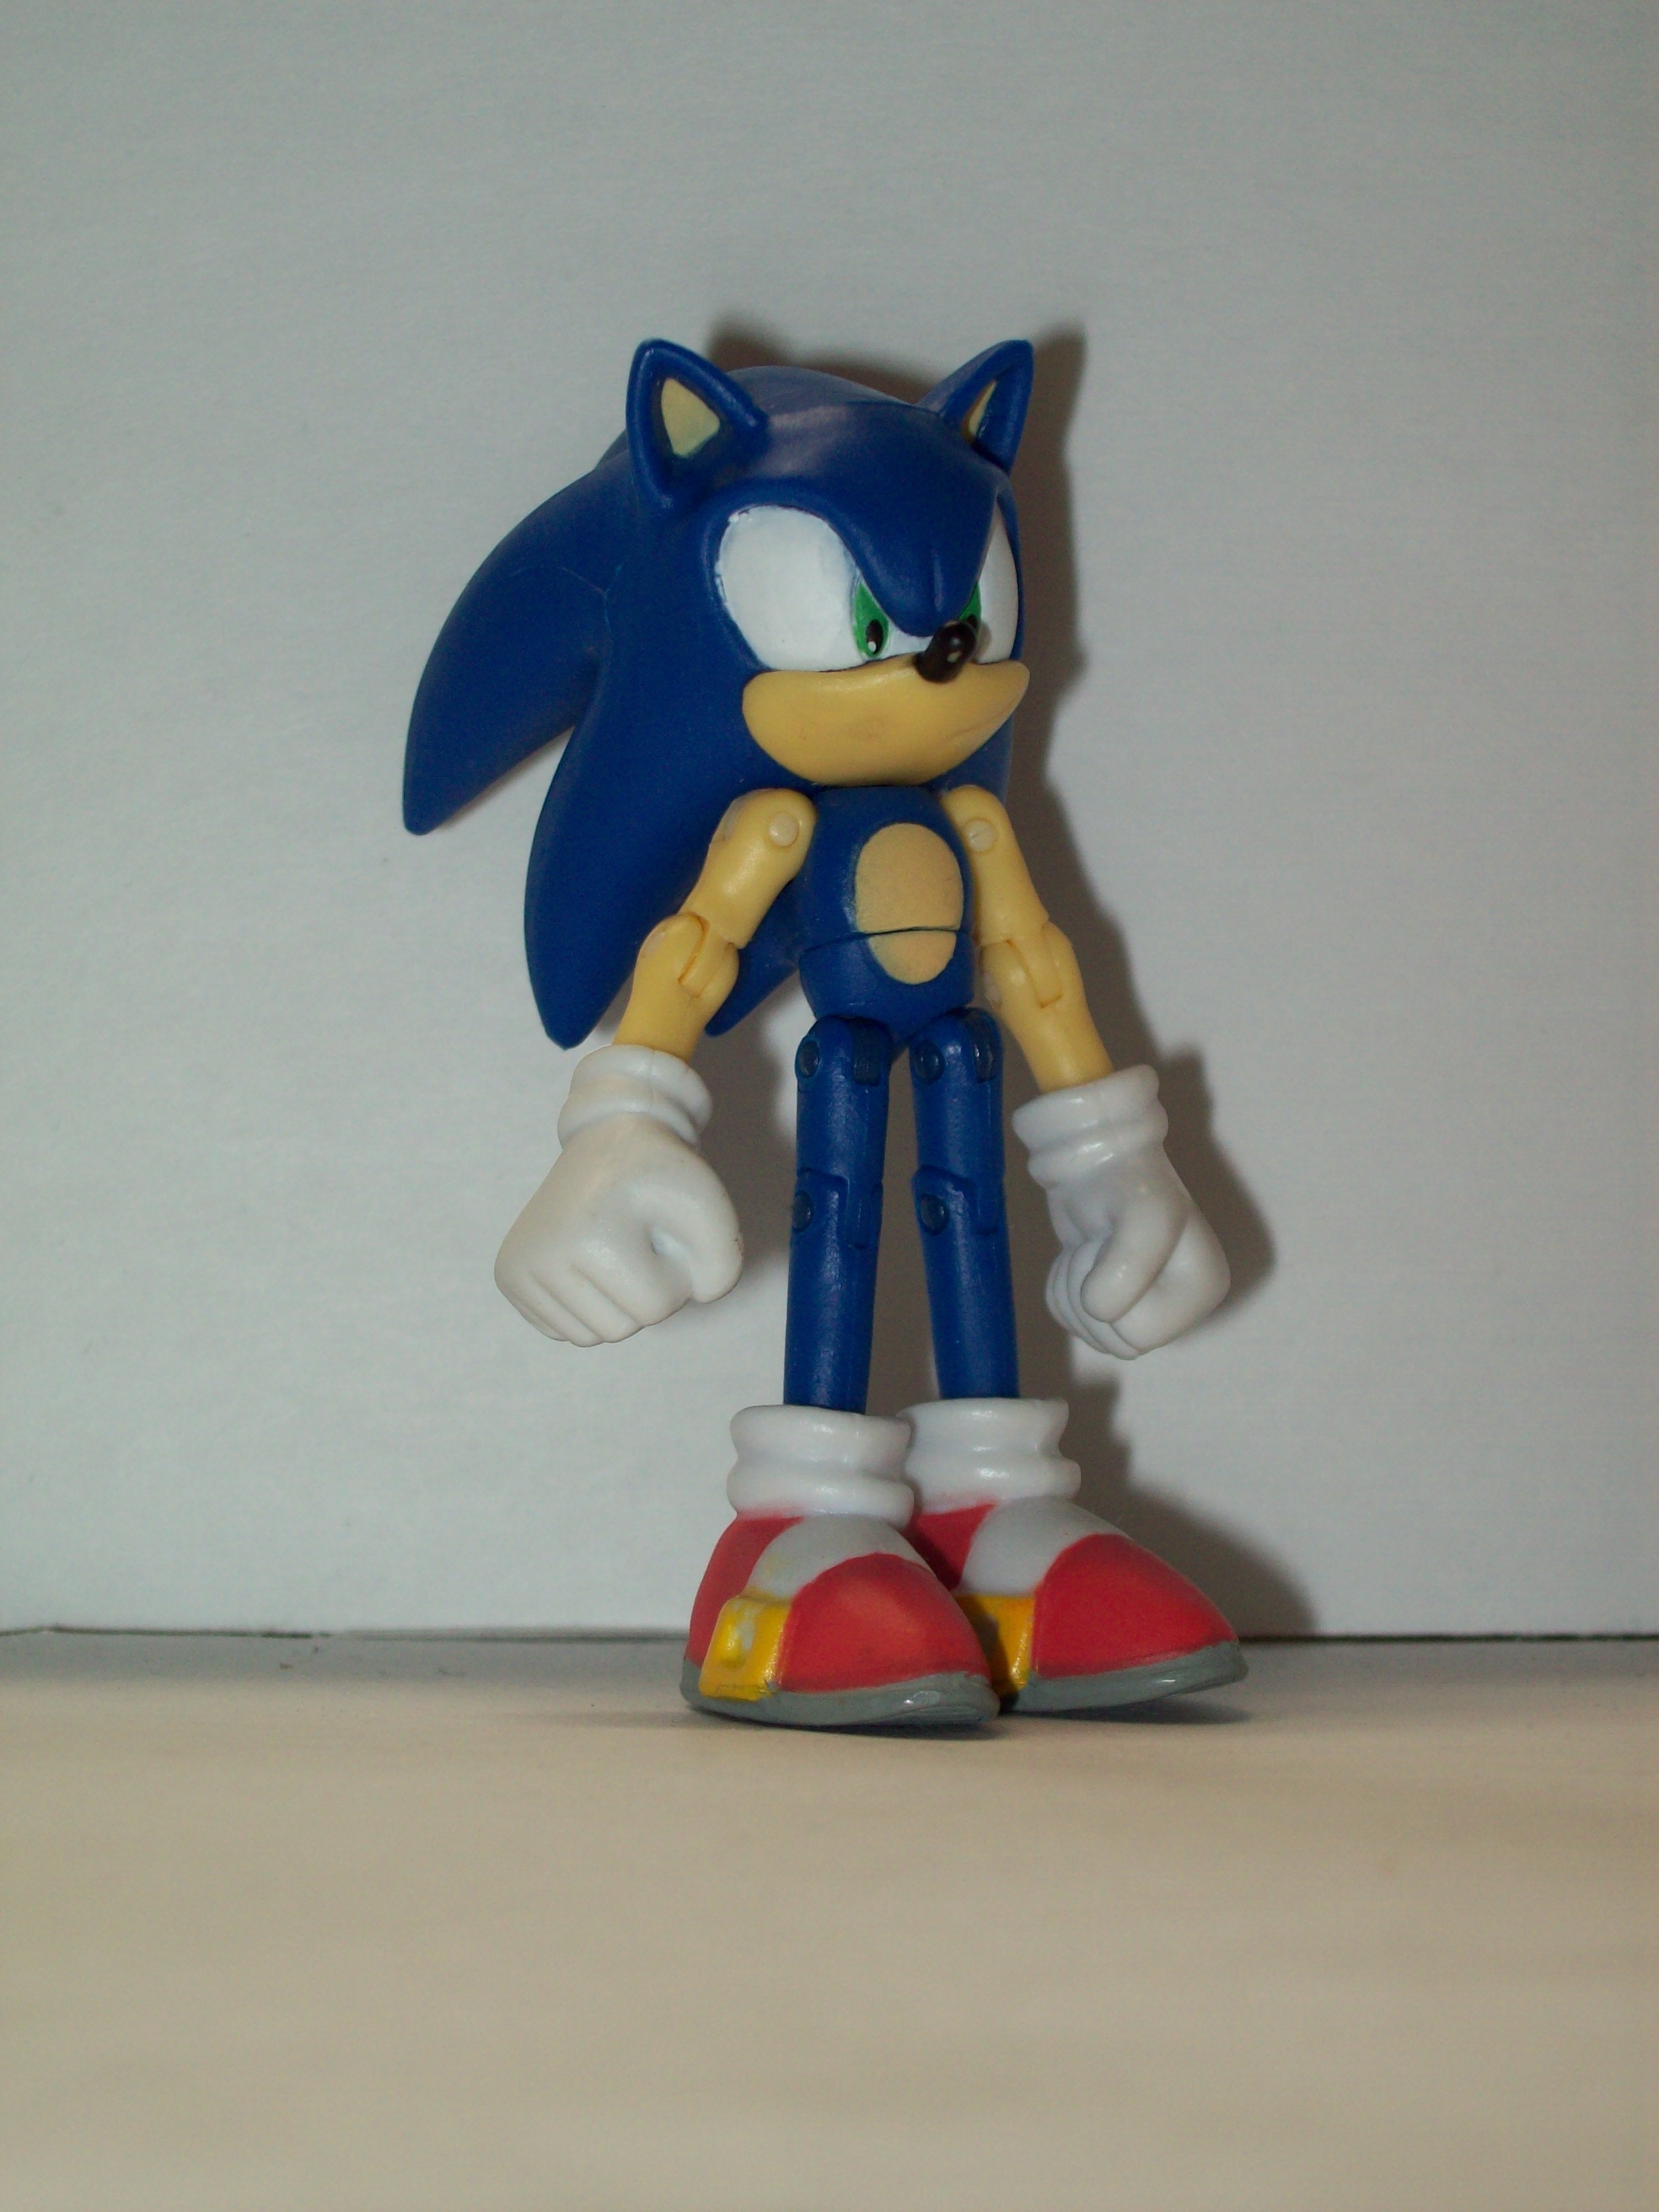 Sonic the Hedgehog Jazwares 3 inch figure Sonic,Tails and Knuckles Review By Jazwares ...2472 x 3296